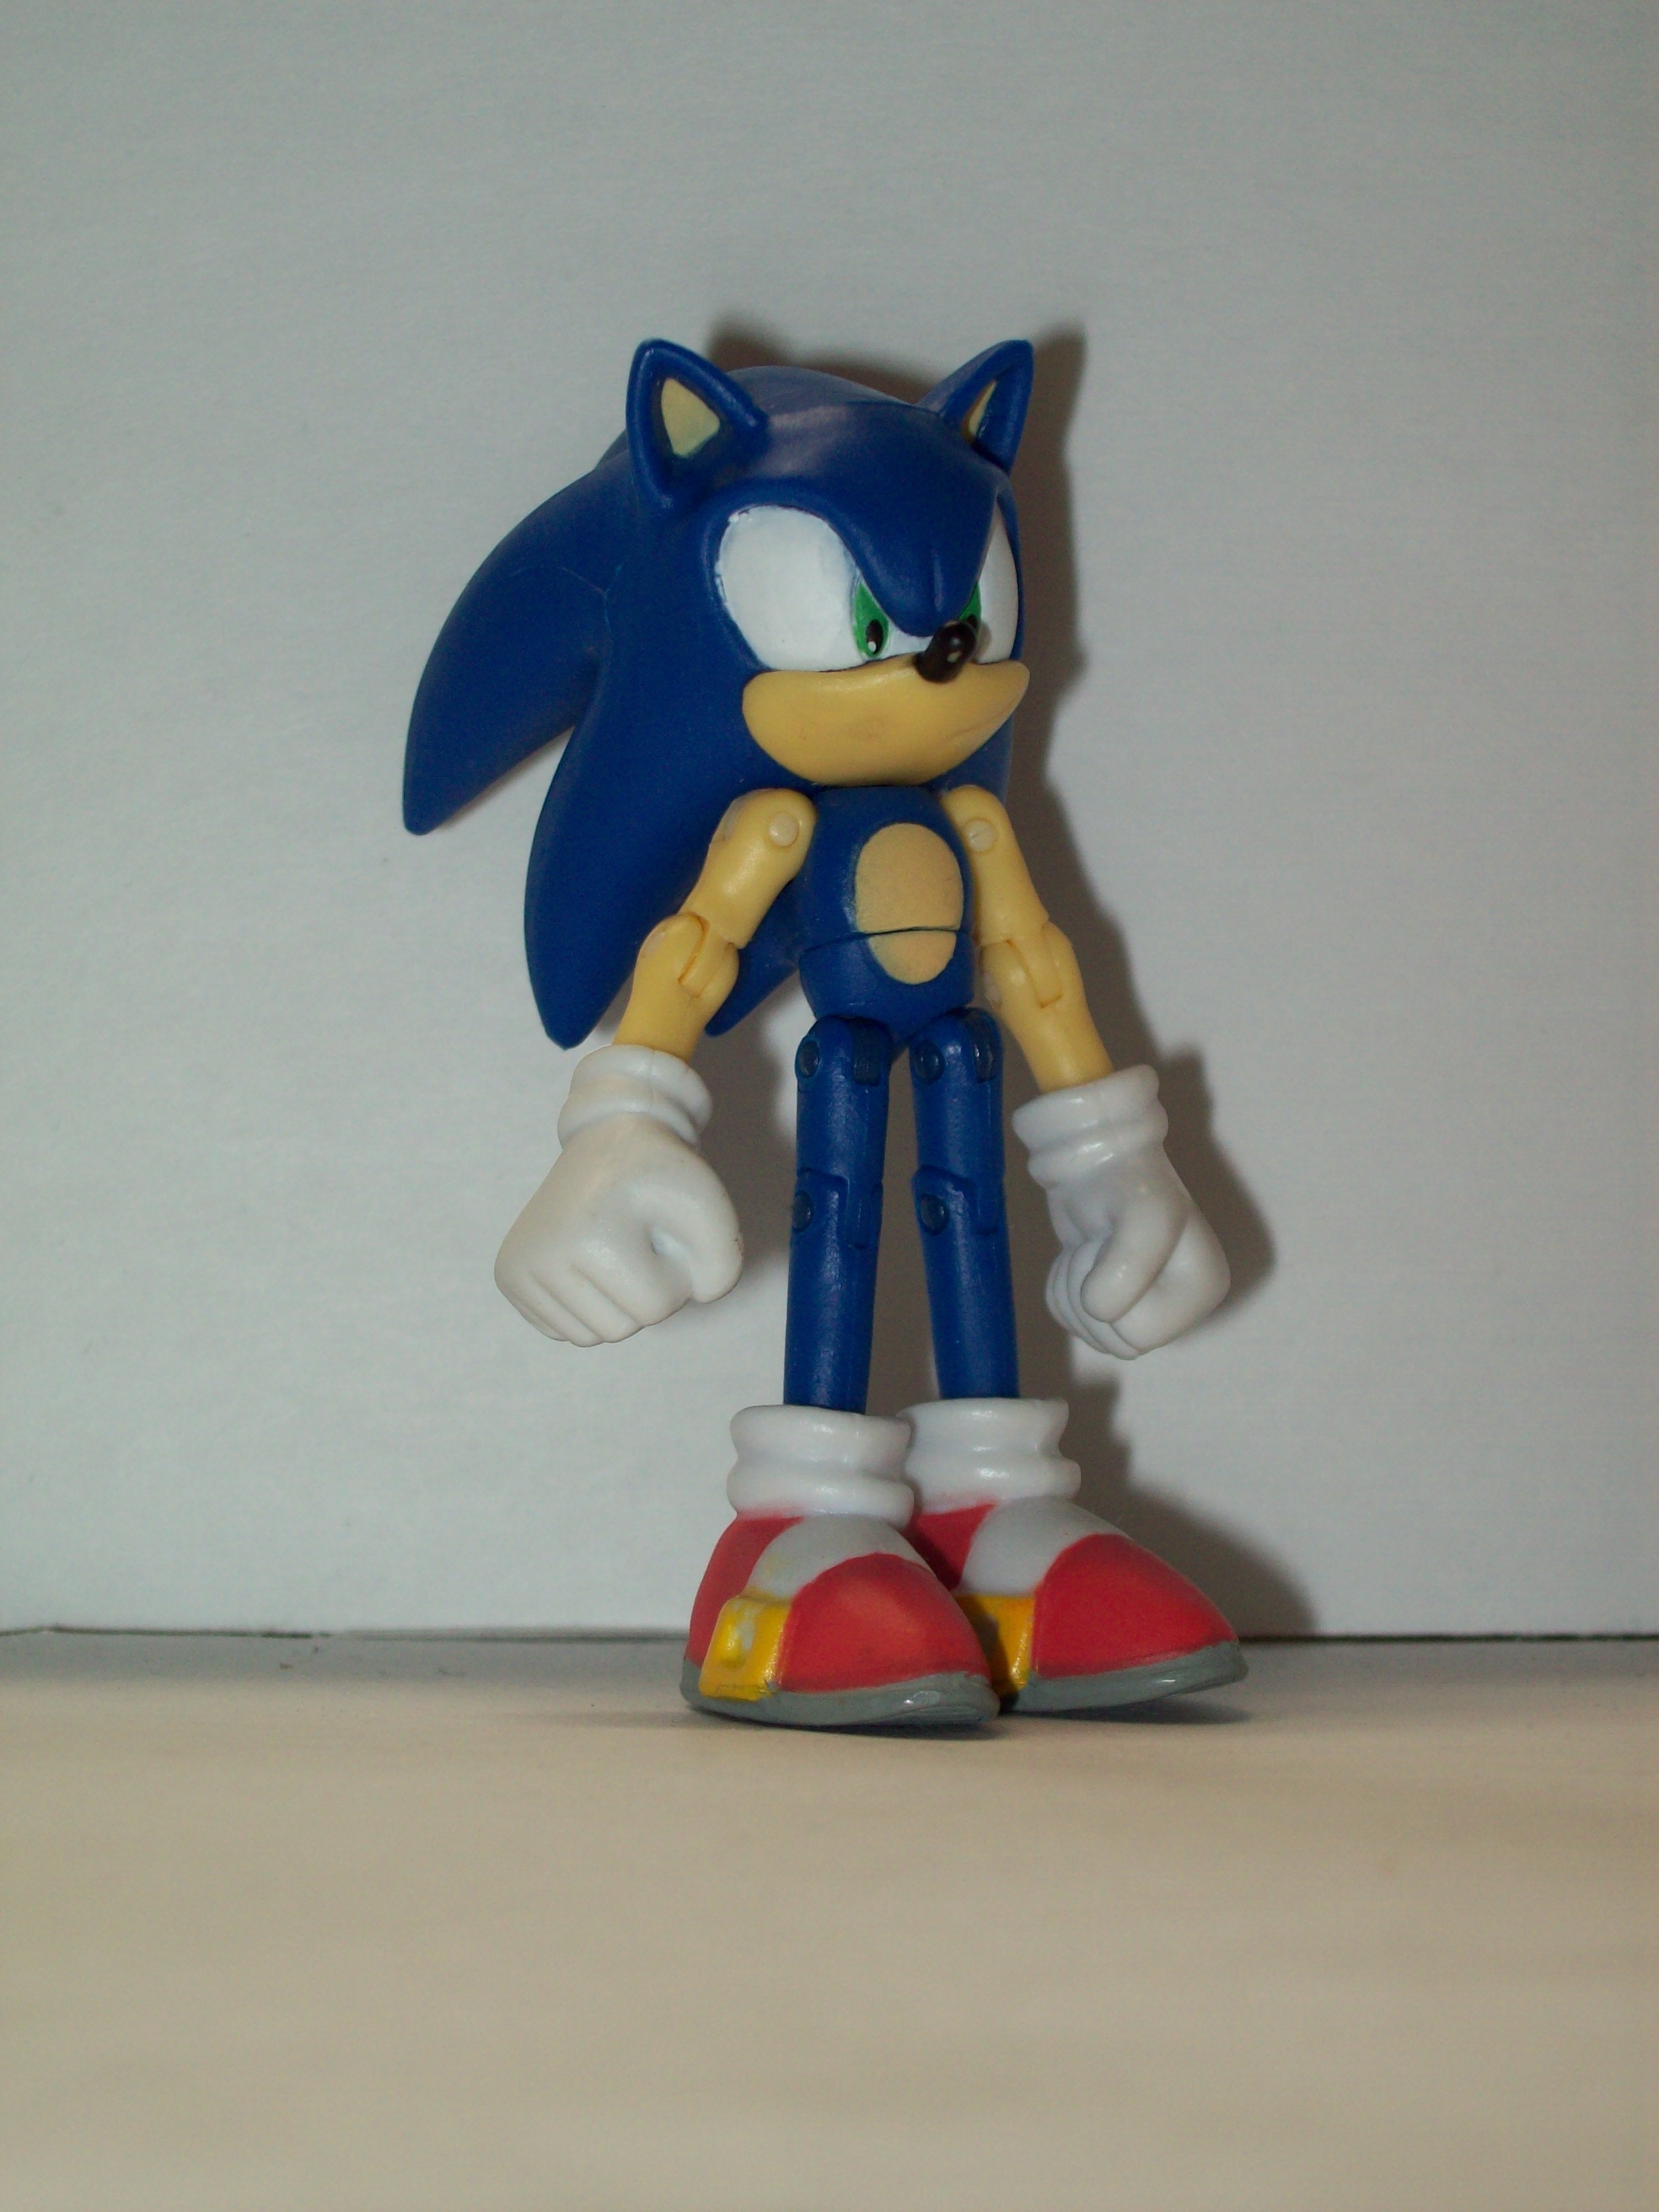 Sonic the Hedgehog Jazwares 3 inch figure Sonic,Tails and Knuckles Review By Jazwares ...2472 x 3296